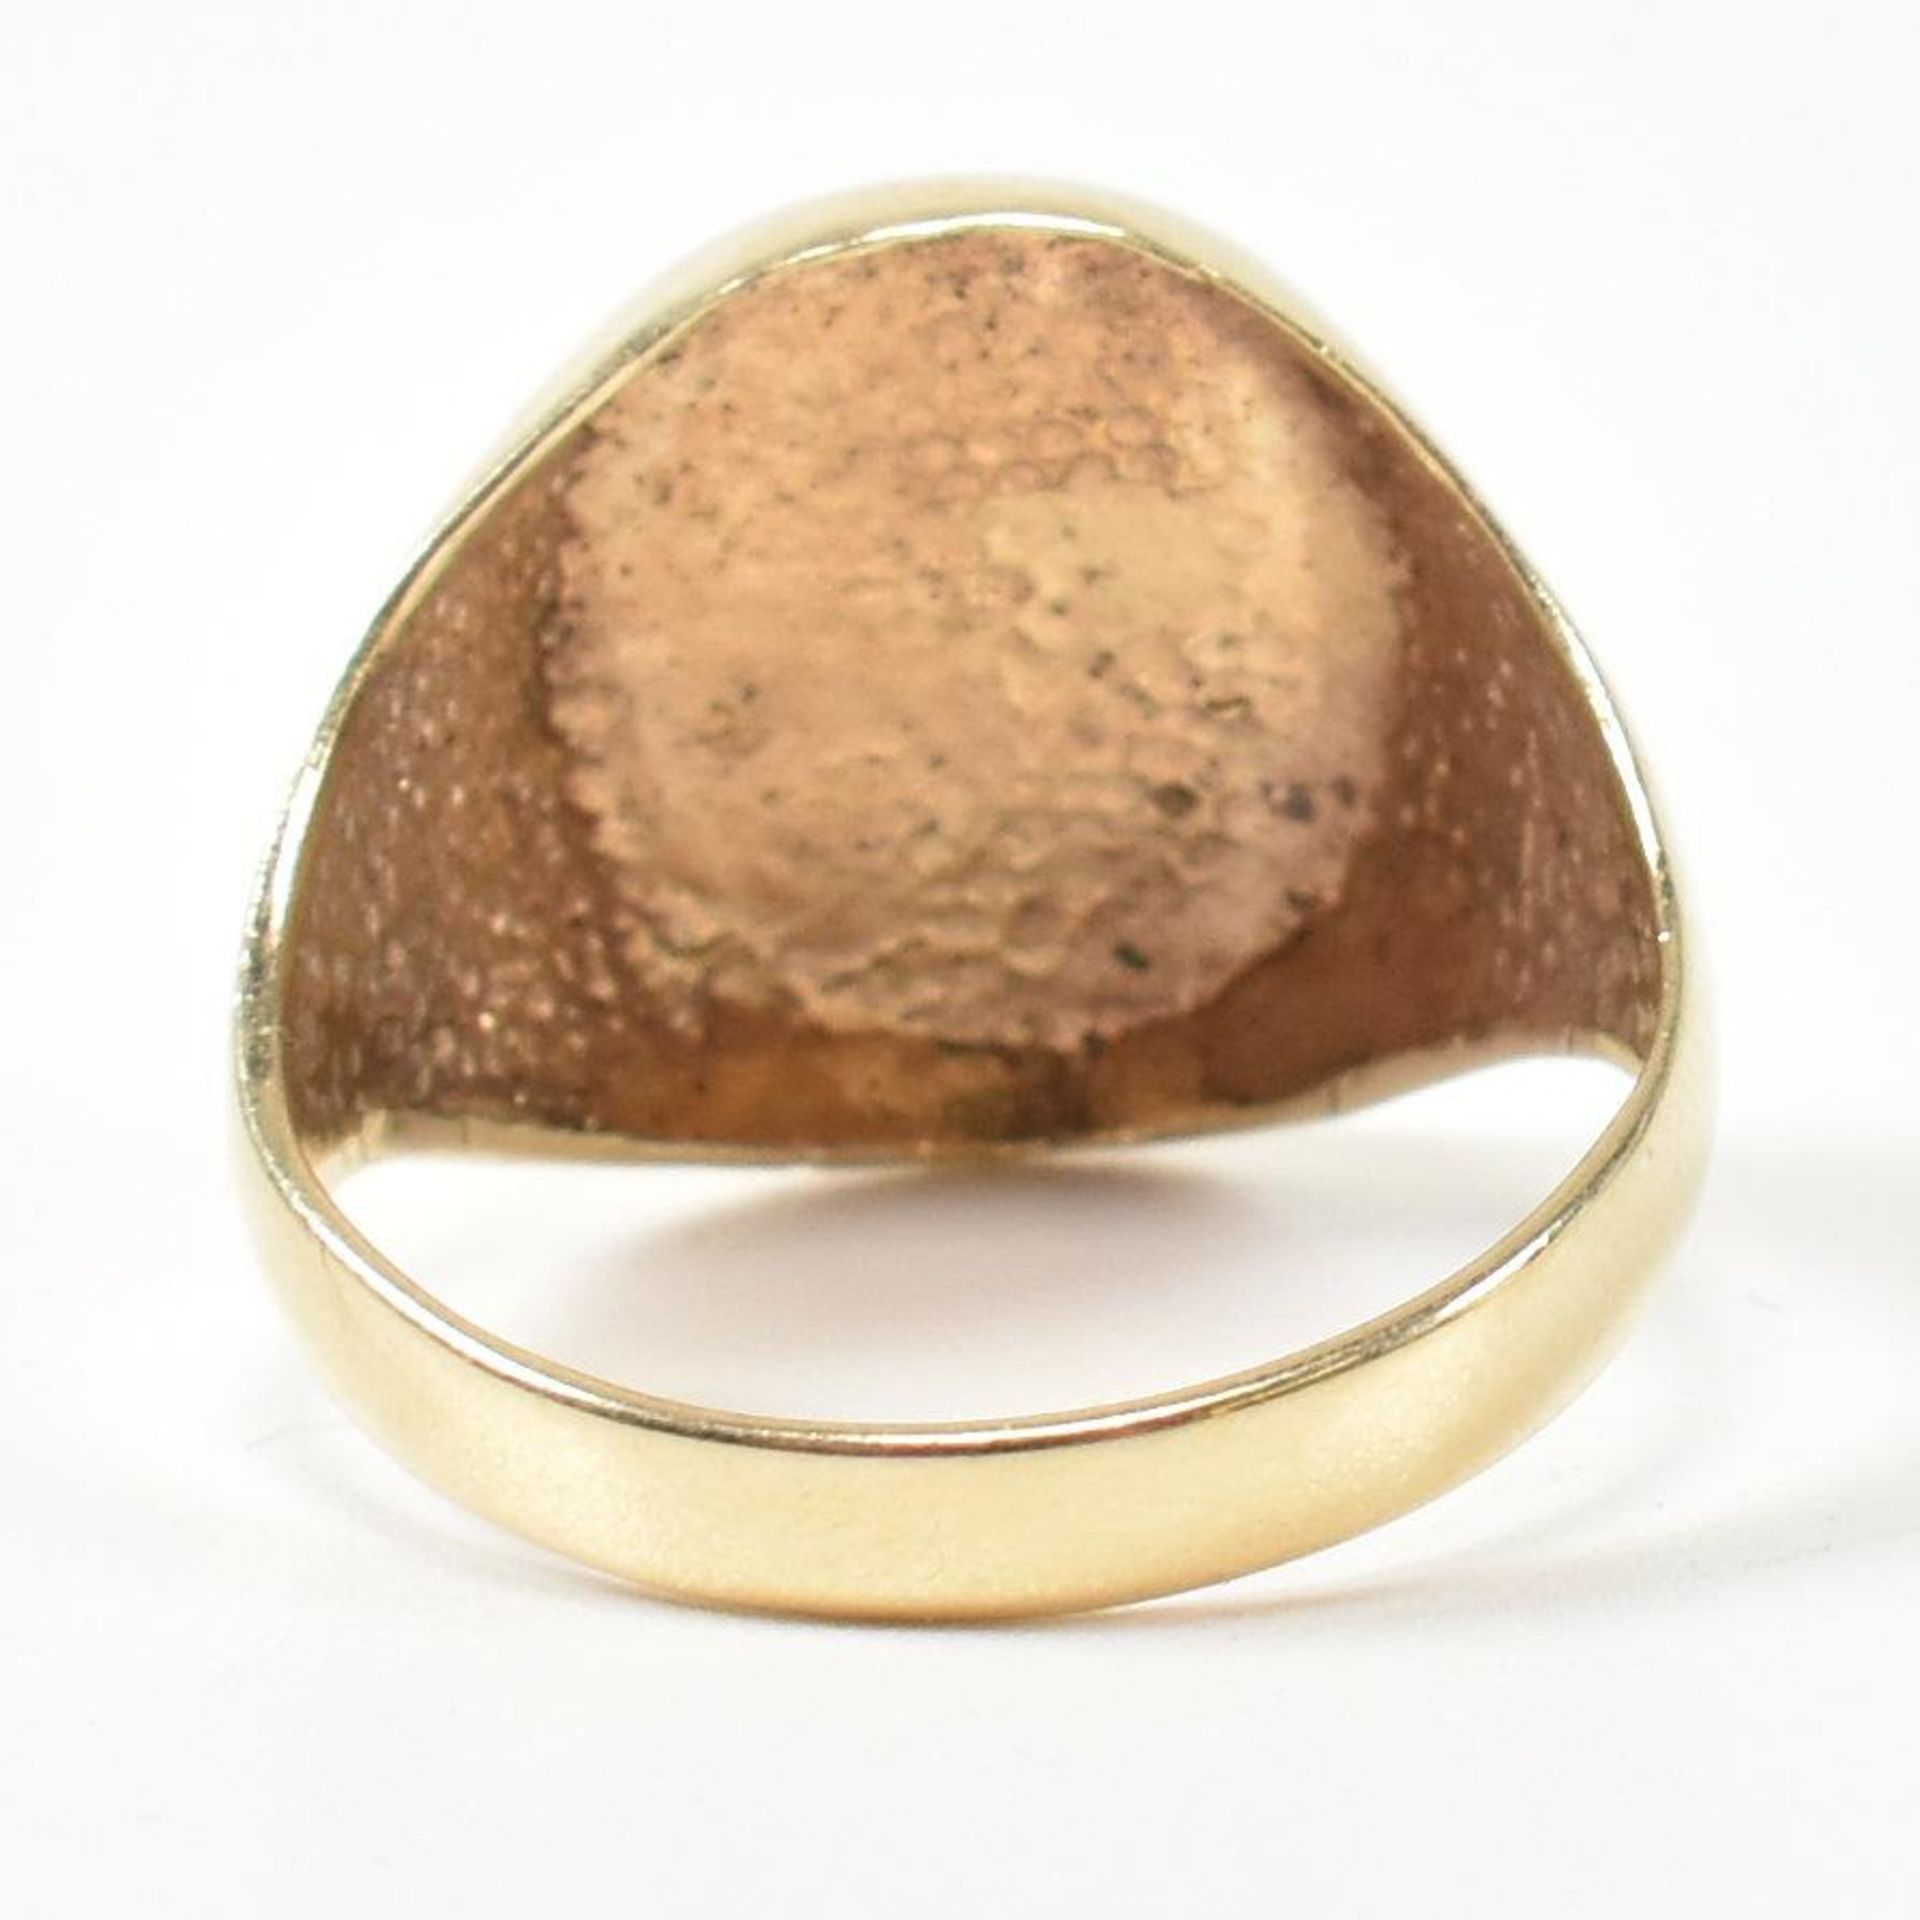 9CT GOLD OVAL SIGNET RING - Image 5 of 6